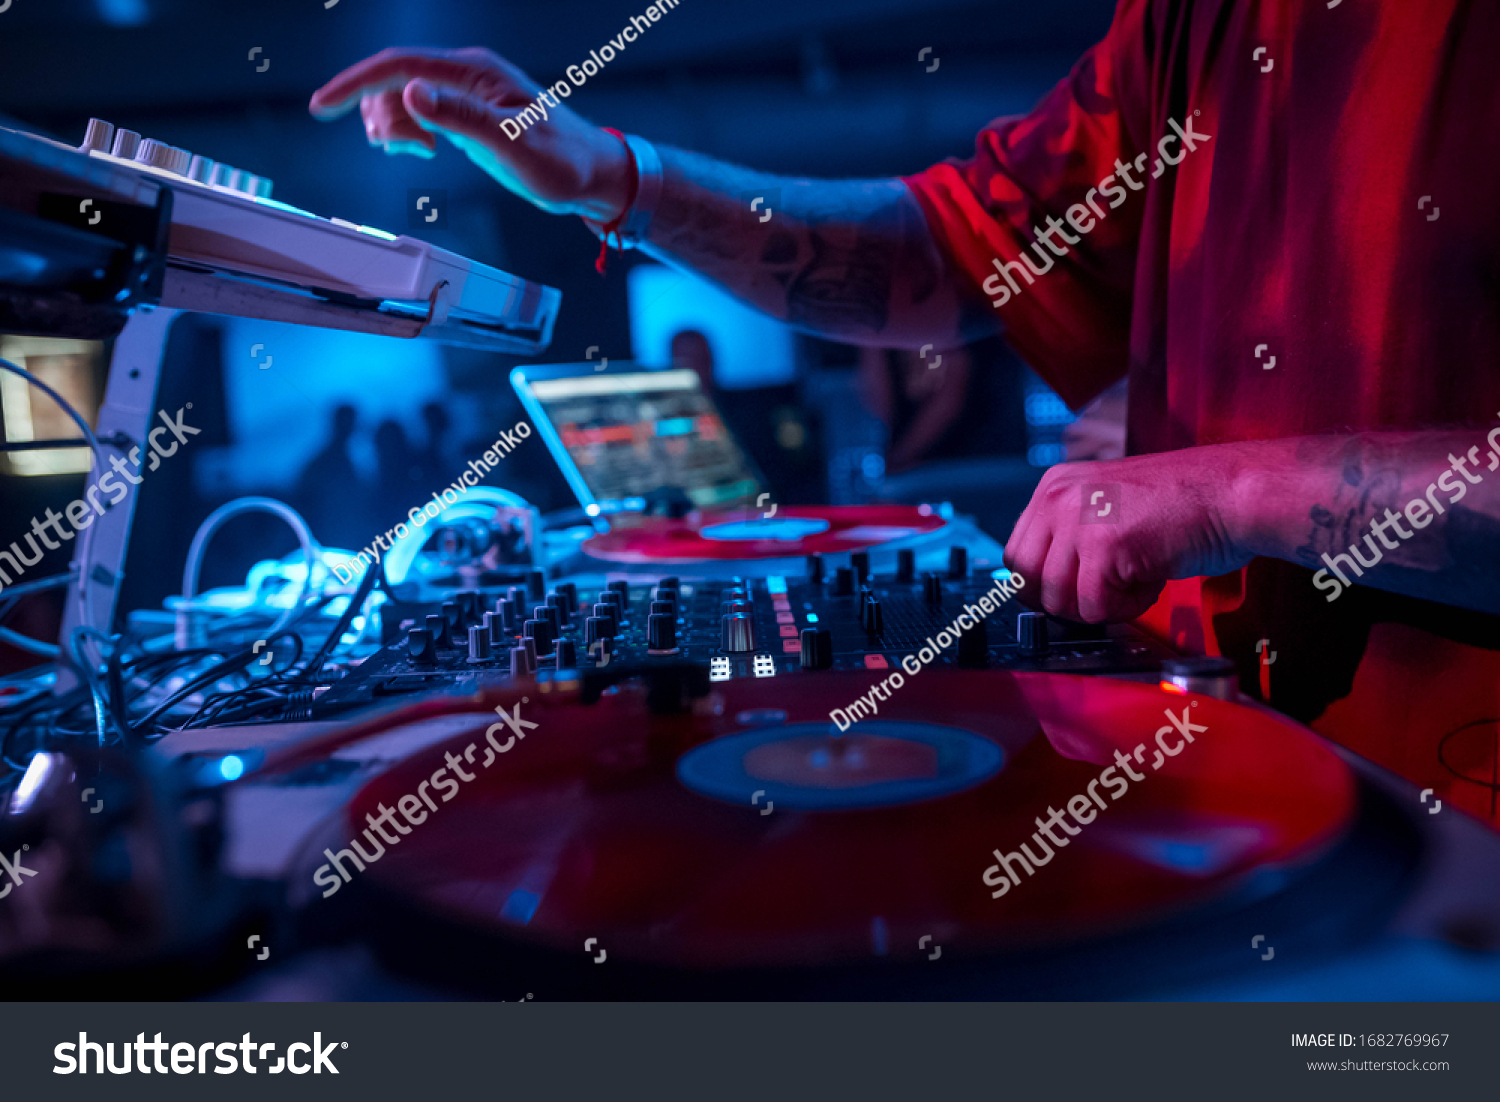 The DJ in the red T-shirt plays on the DJ equipment, play vinyl turntable, on the microbrand console using the controller. disco DJ. night life. atmosphere. club photo #1682769967